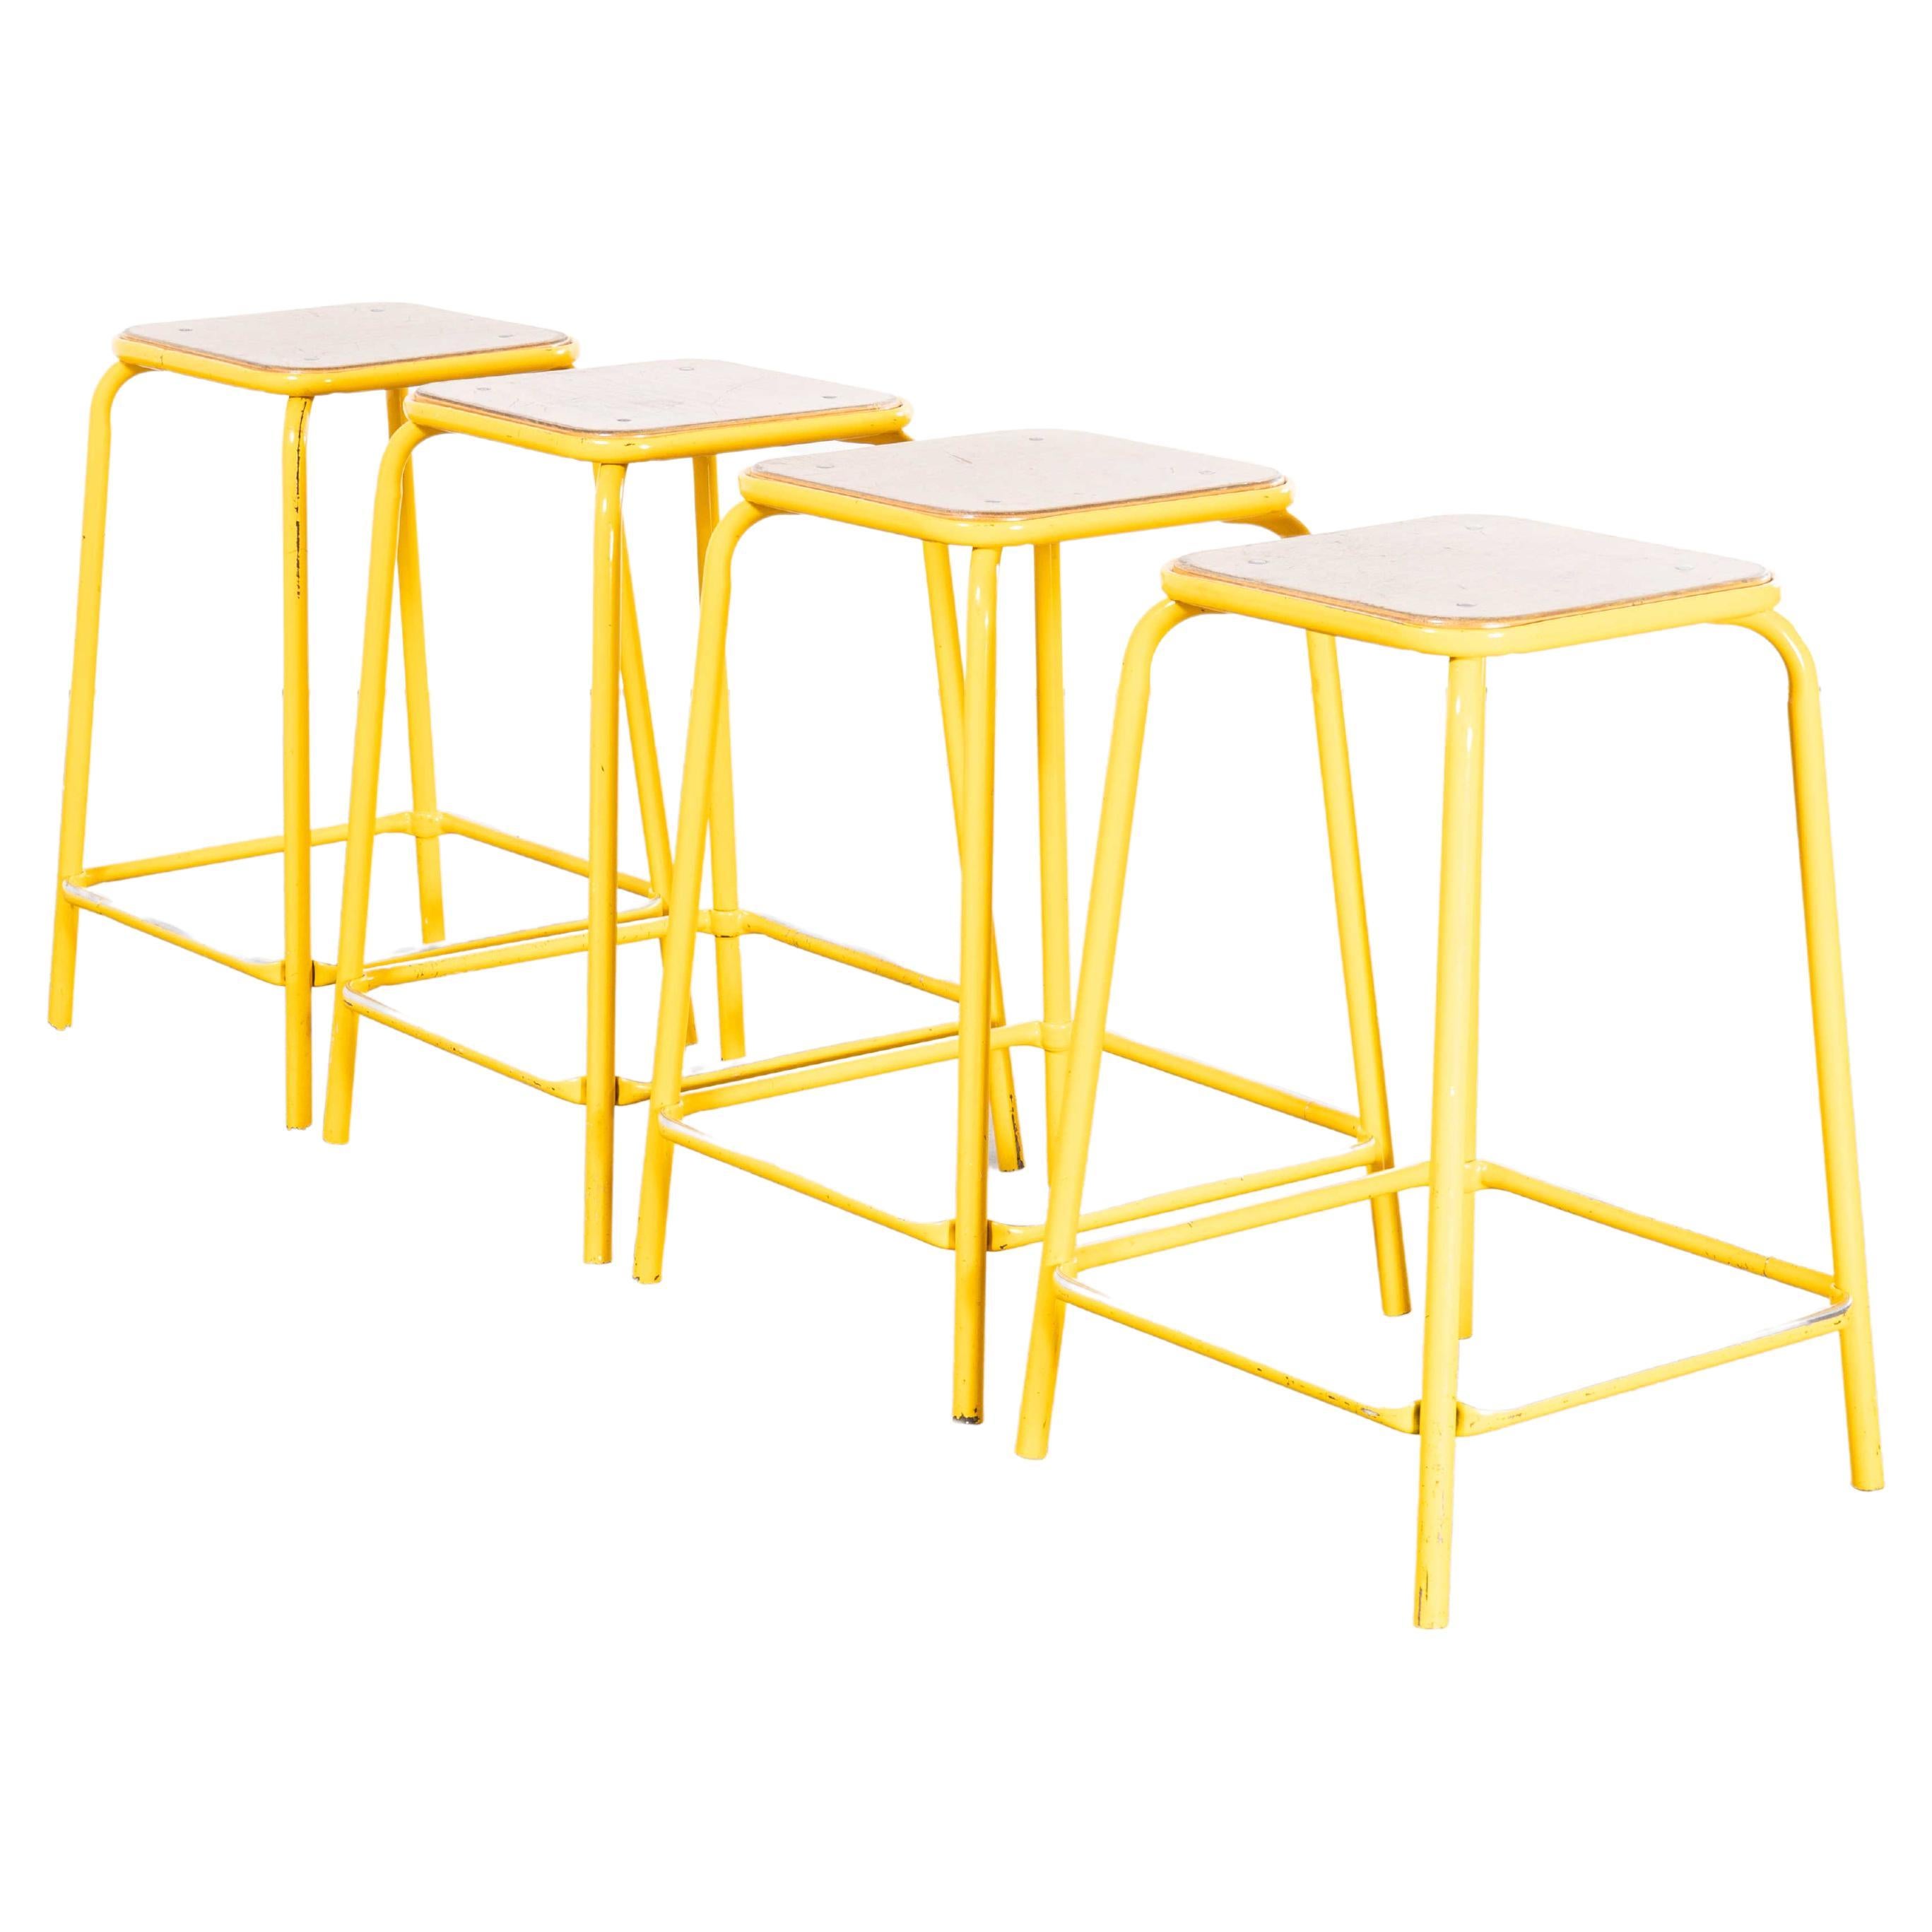 1960's Original Mullca French High Stools - Yellow - Set Of Four For Sale